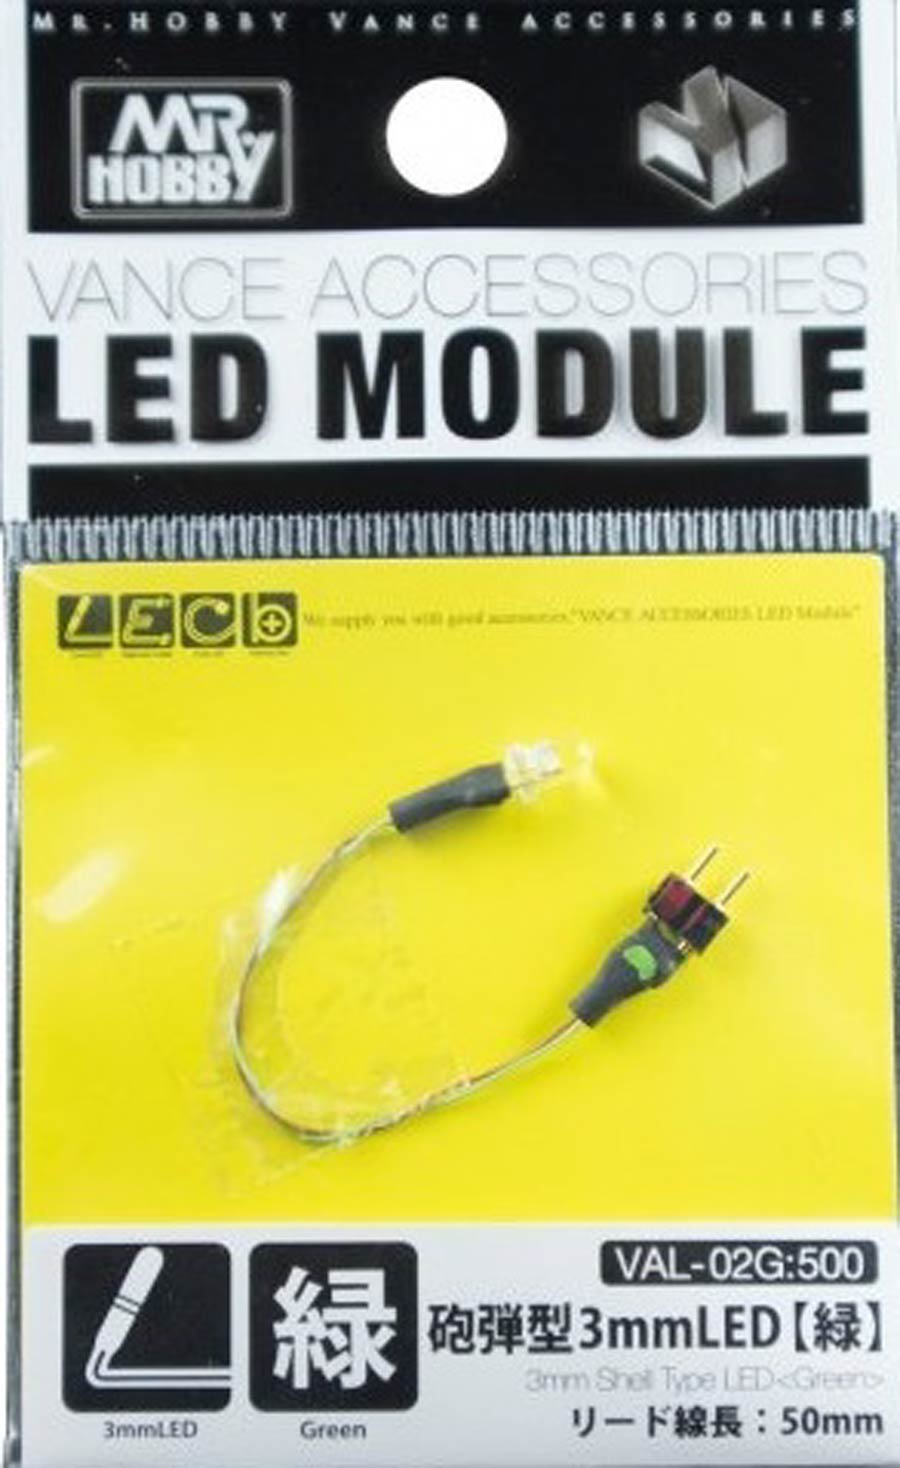 Mr. Hobby Vance Accessories LED Module -  Bag Of 10 Units - 3mm Shell Type LED (Green)